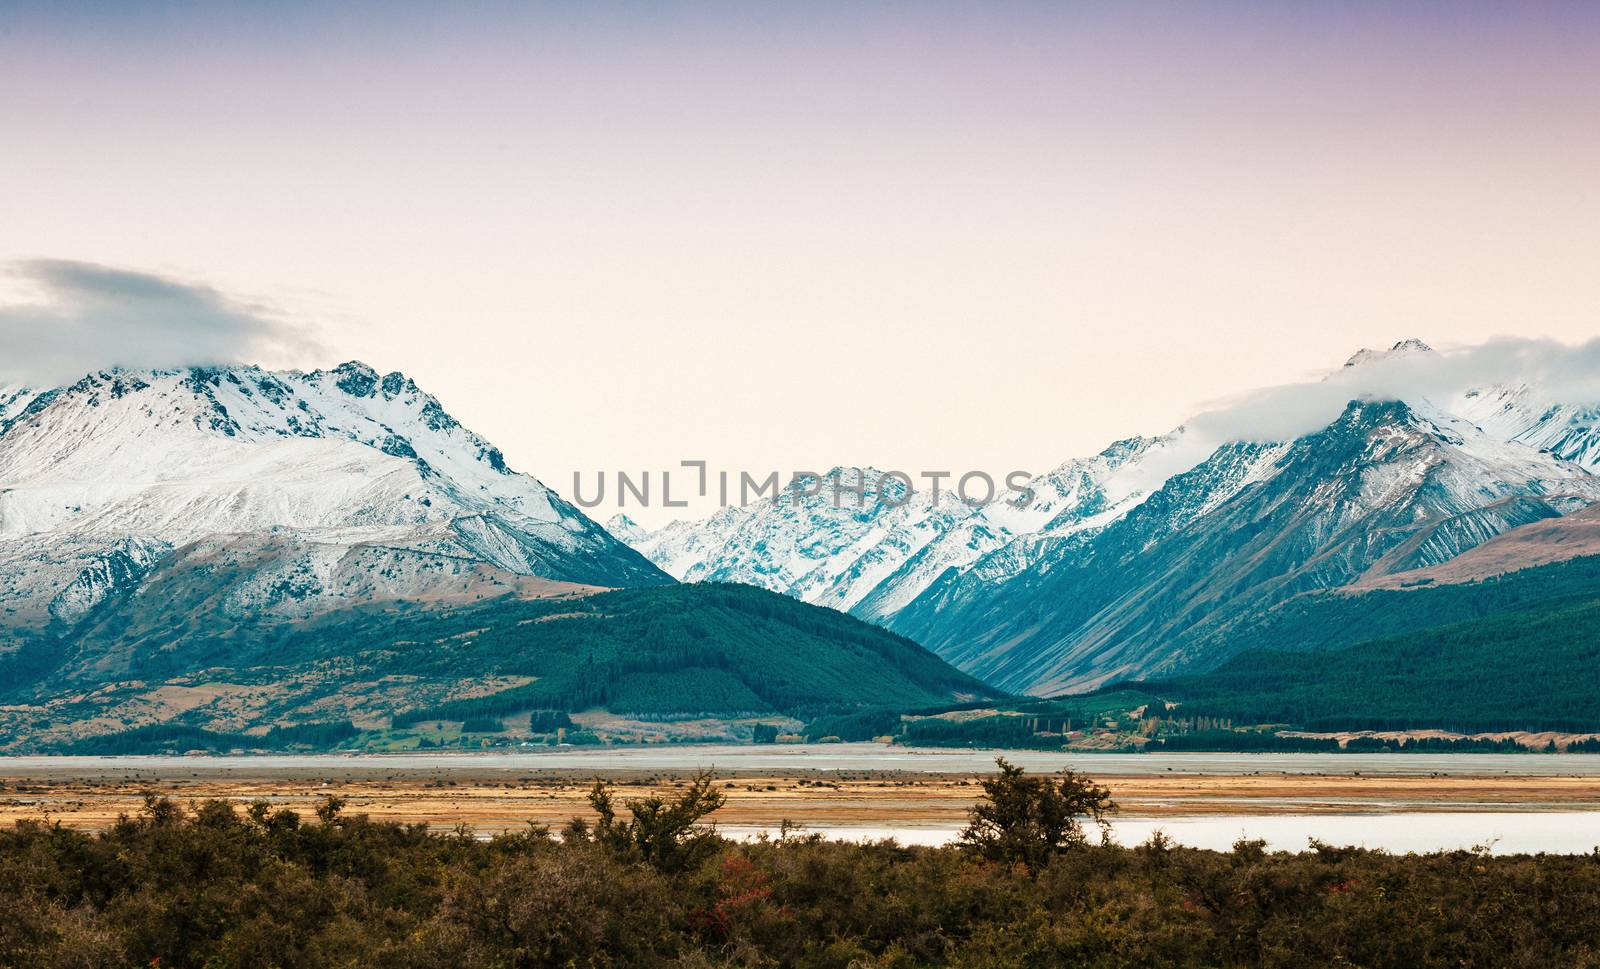 Snowcapped Mt. Cook Peak during Sunset in Mt. Cook National Park, magnificent rugged mountain with snow and ice, South Island, New Zealand